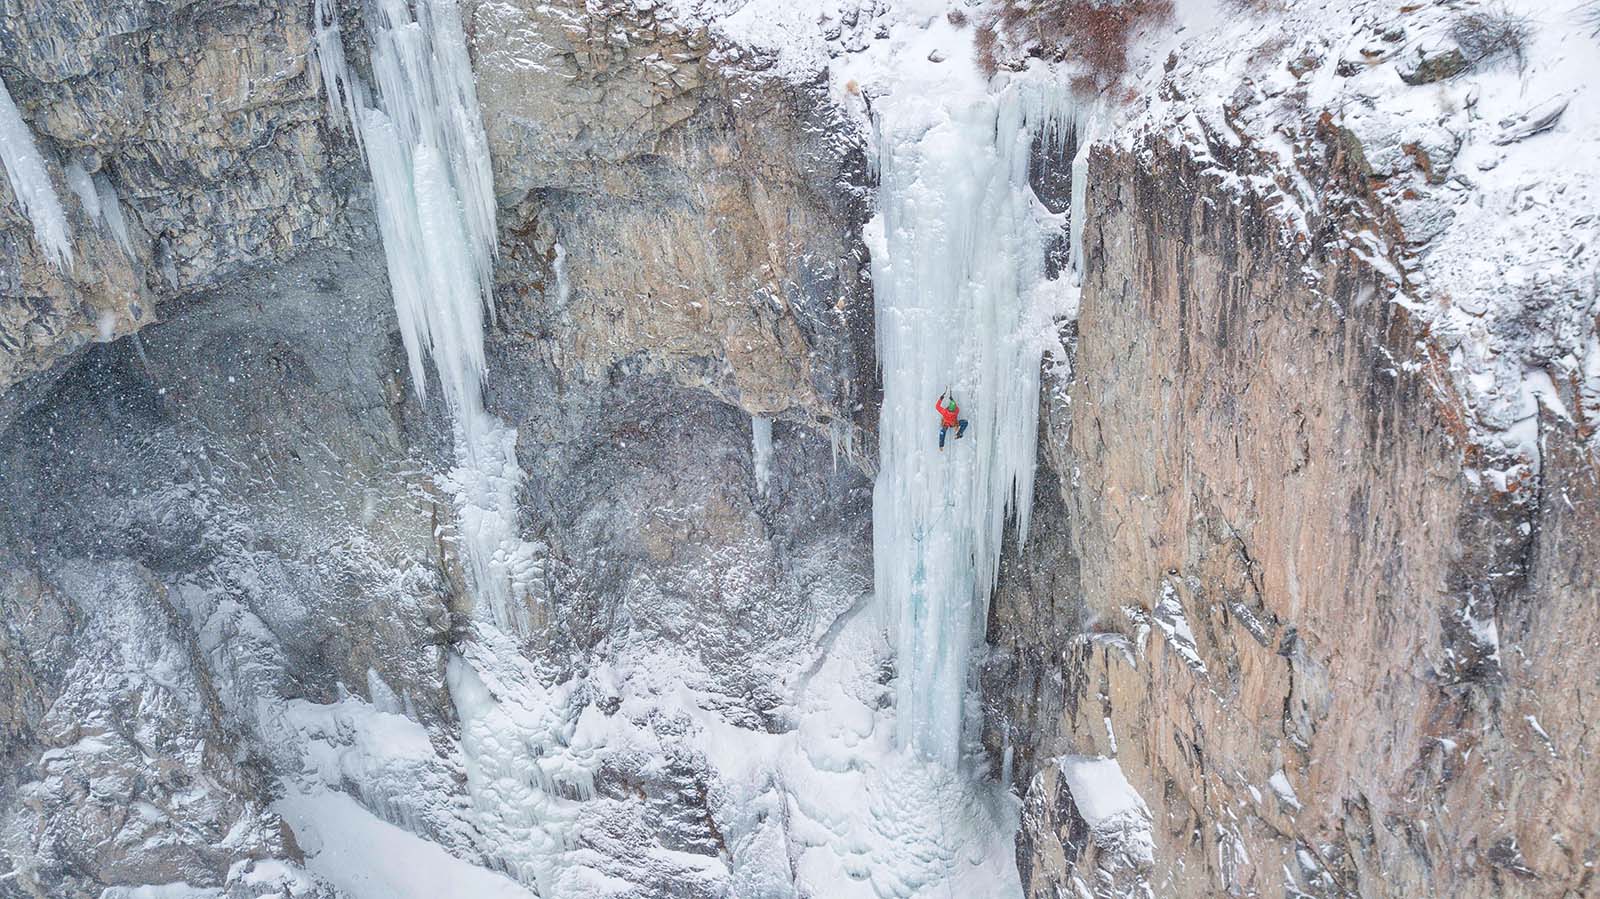 Cody-based ice climber Aaron Mulkey makes his way up a frozen waterfall called Bitches Brew, named after the song by Miles Davis. Doug Shepherd photo.